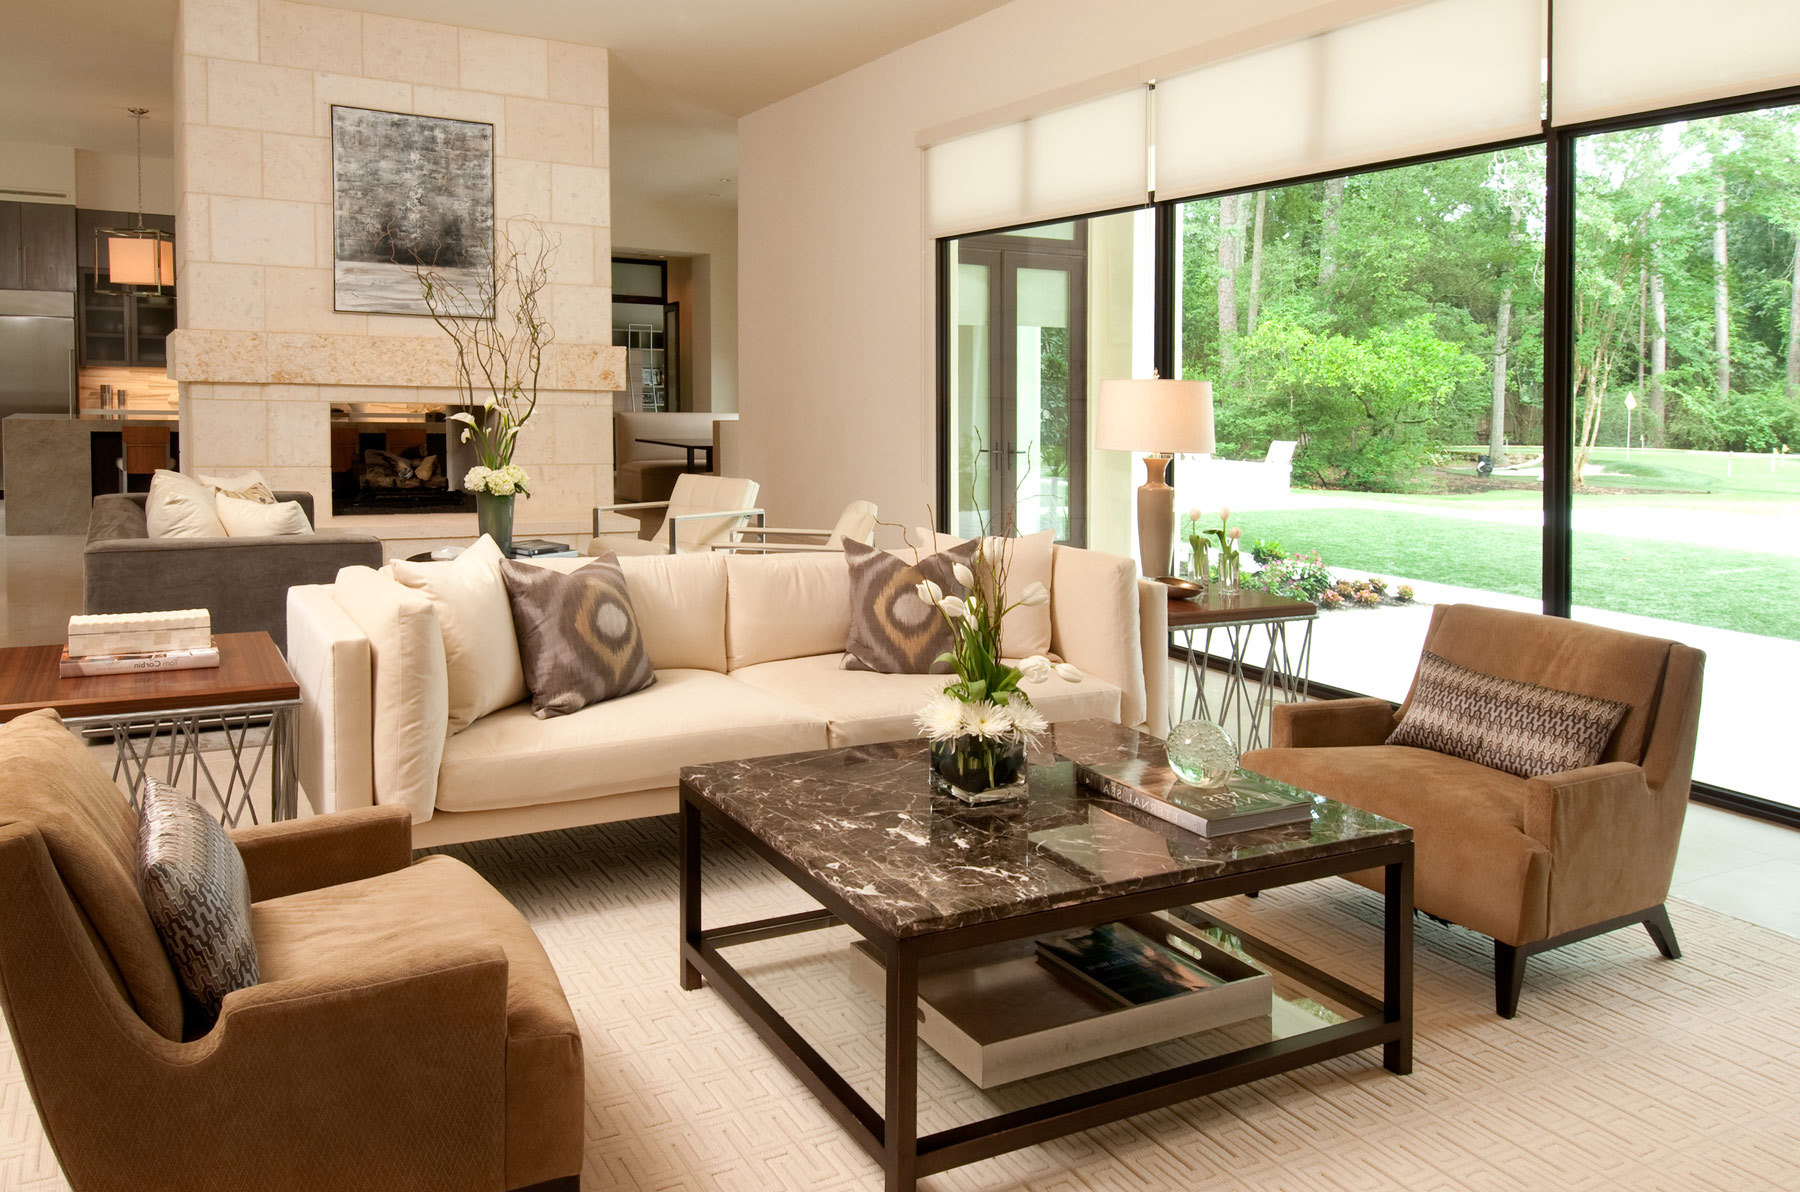 Best Living Room Decorating Ideas: Transform Your Living Room Into A Cozy And Inviting Space